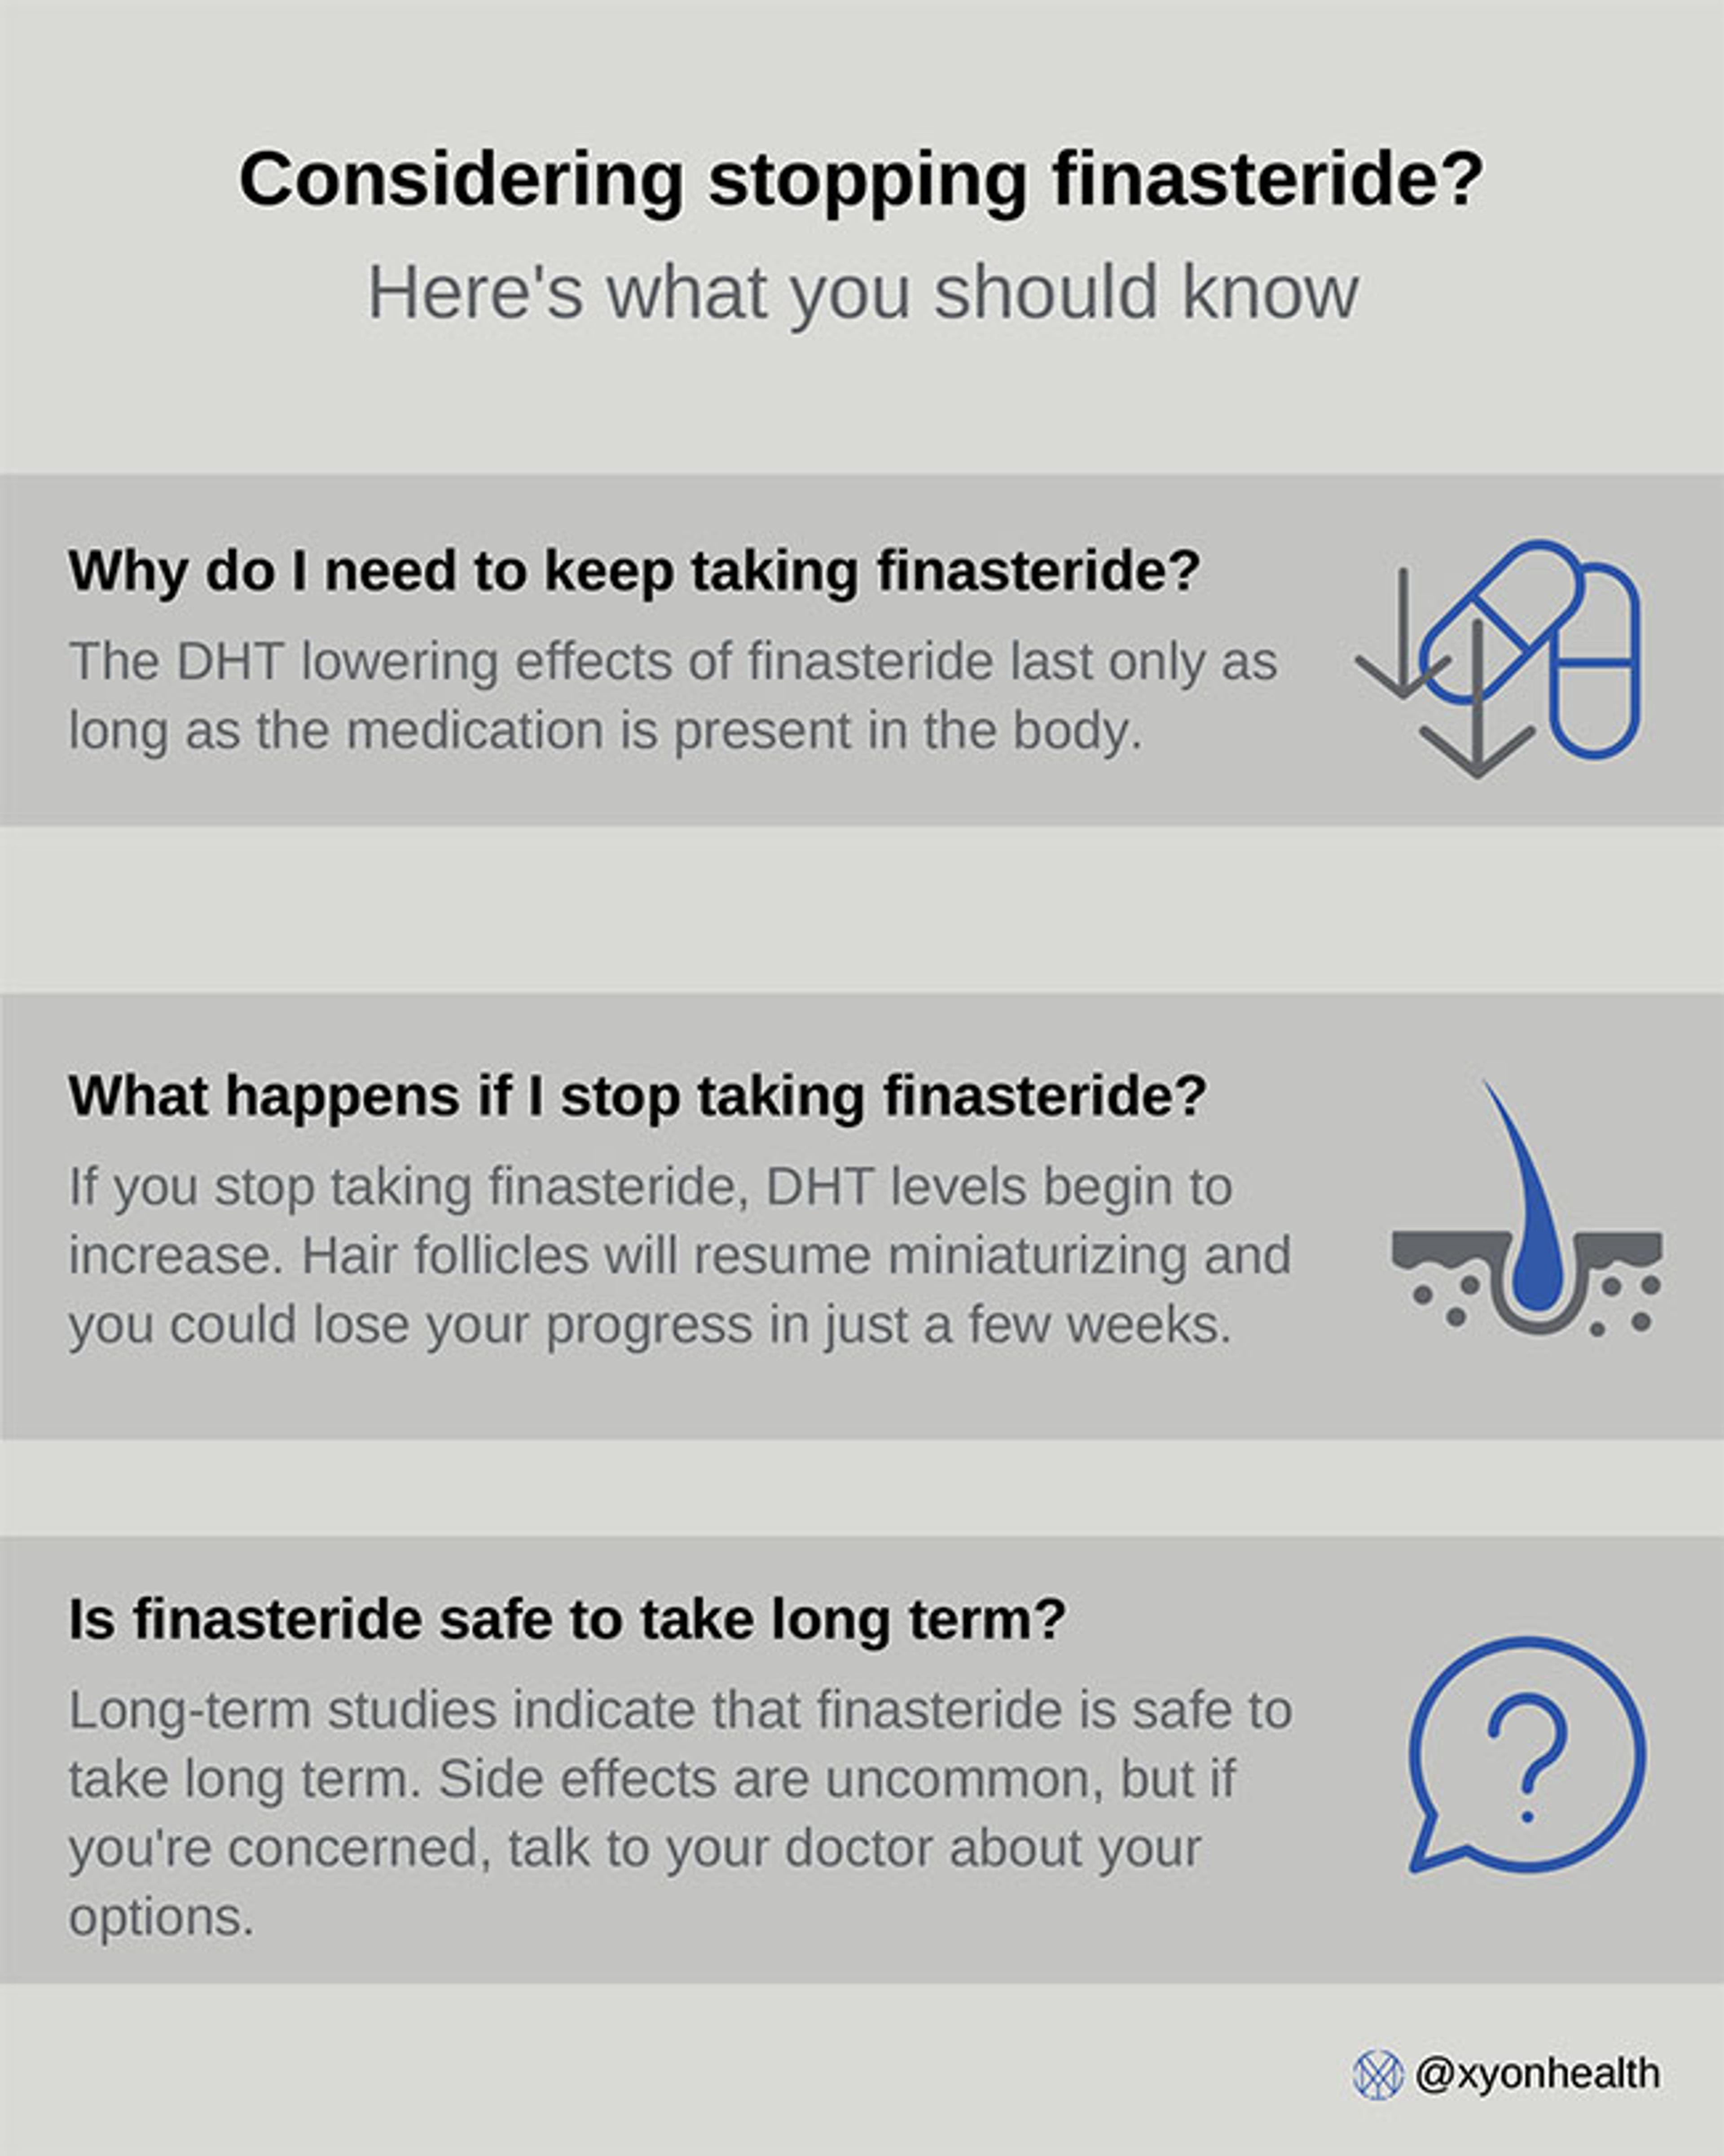 Summary of key issues concerning stopping finasteride